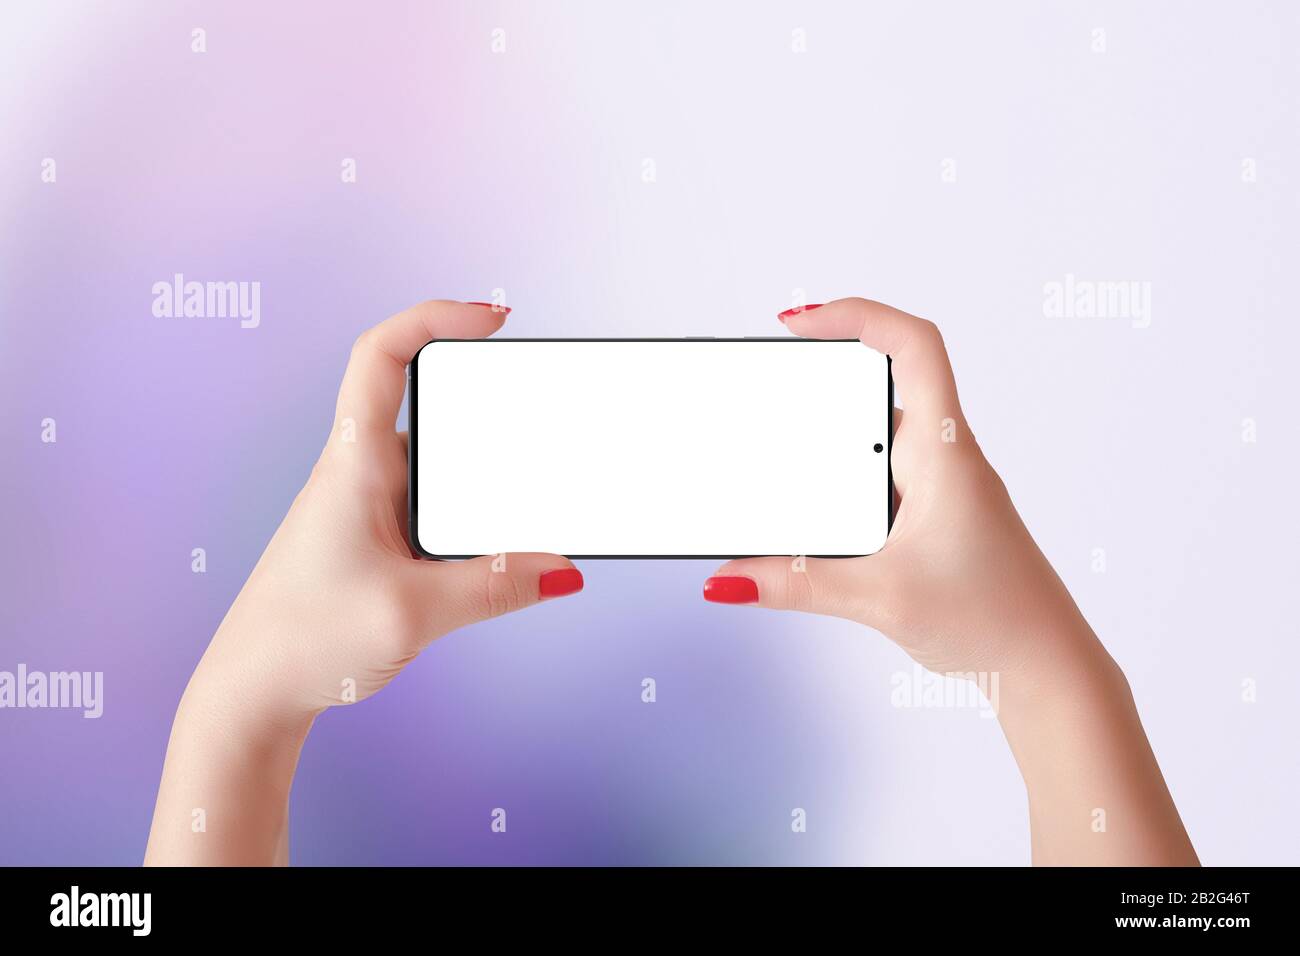 Phone mockup in horizontal position in woman hands. Purple abstract background Stock Photo